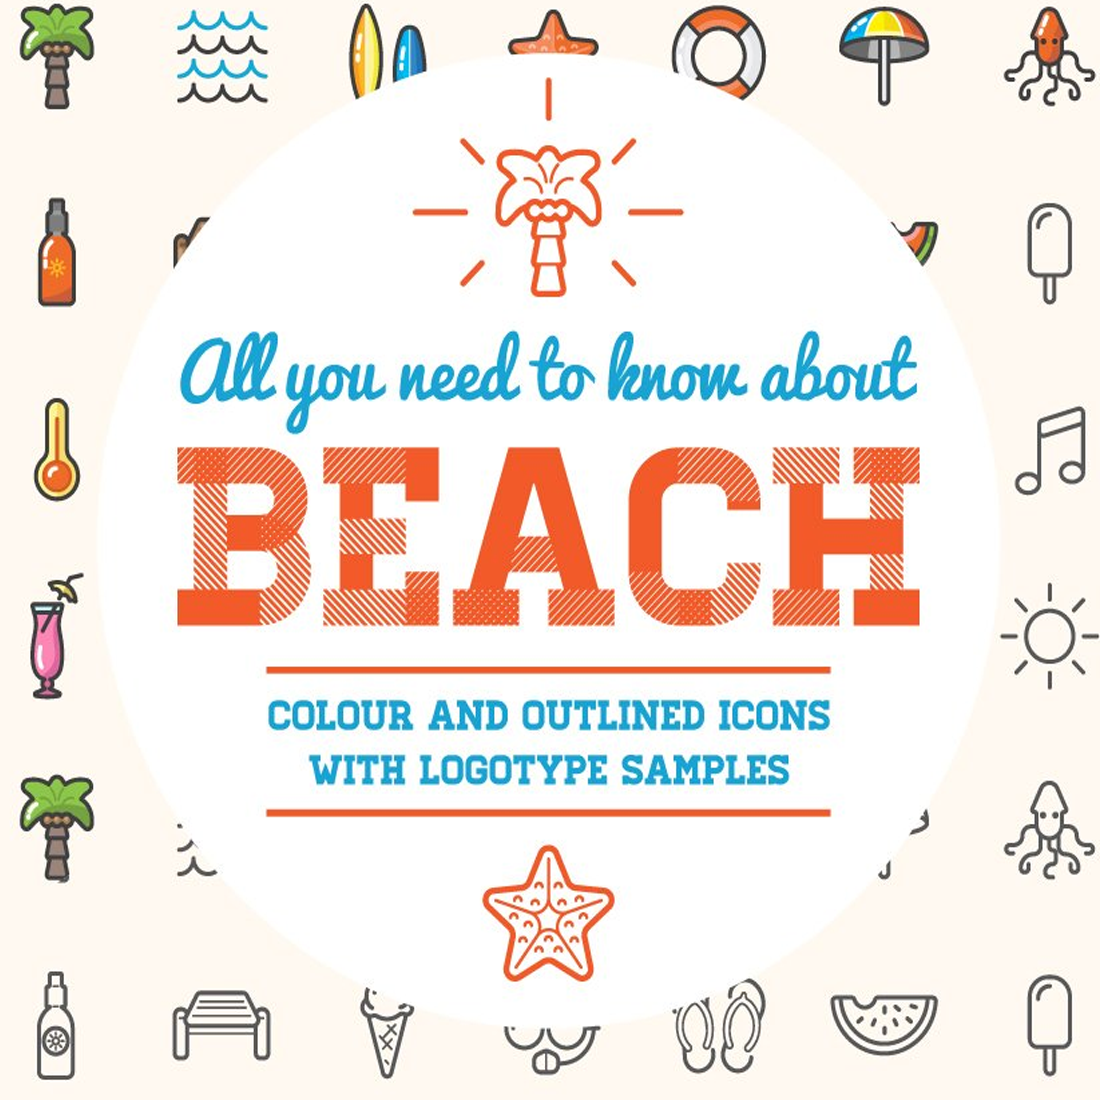 Images preview awesome beachbar icons and logo set.